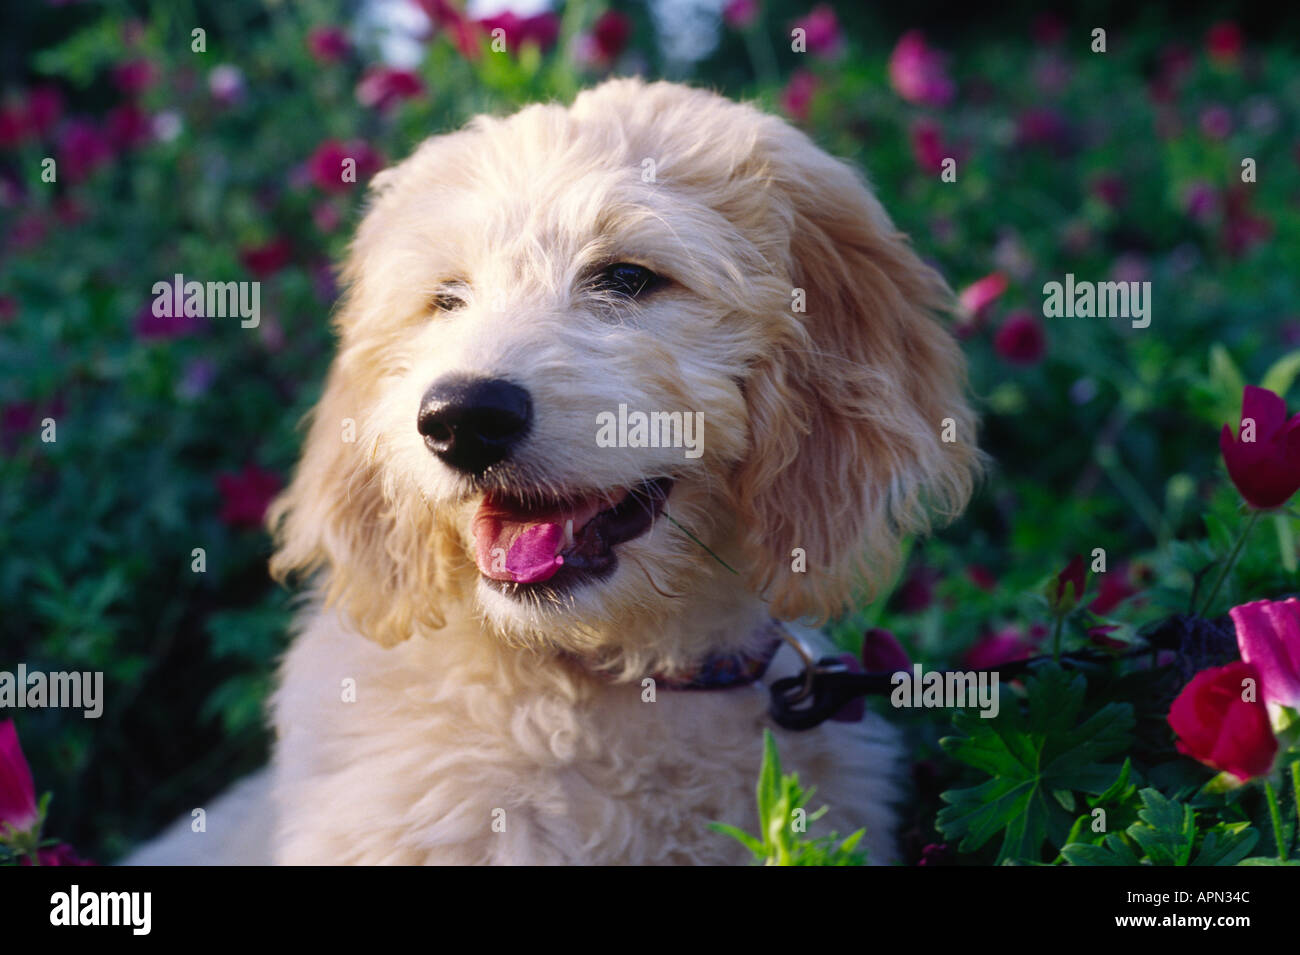 golden doodle puppy mixed breed dog eating flowers Stock Photo